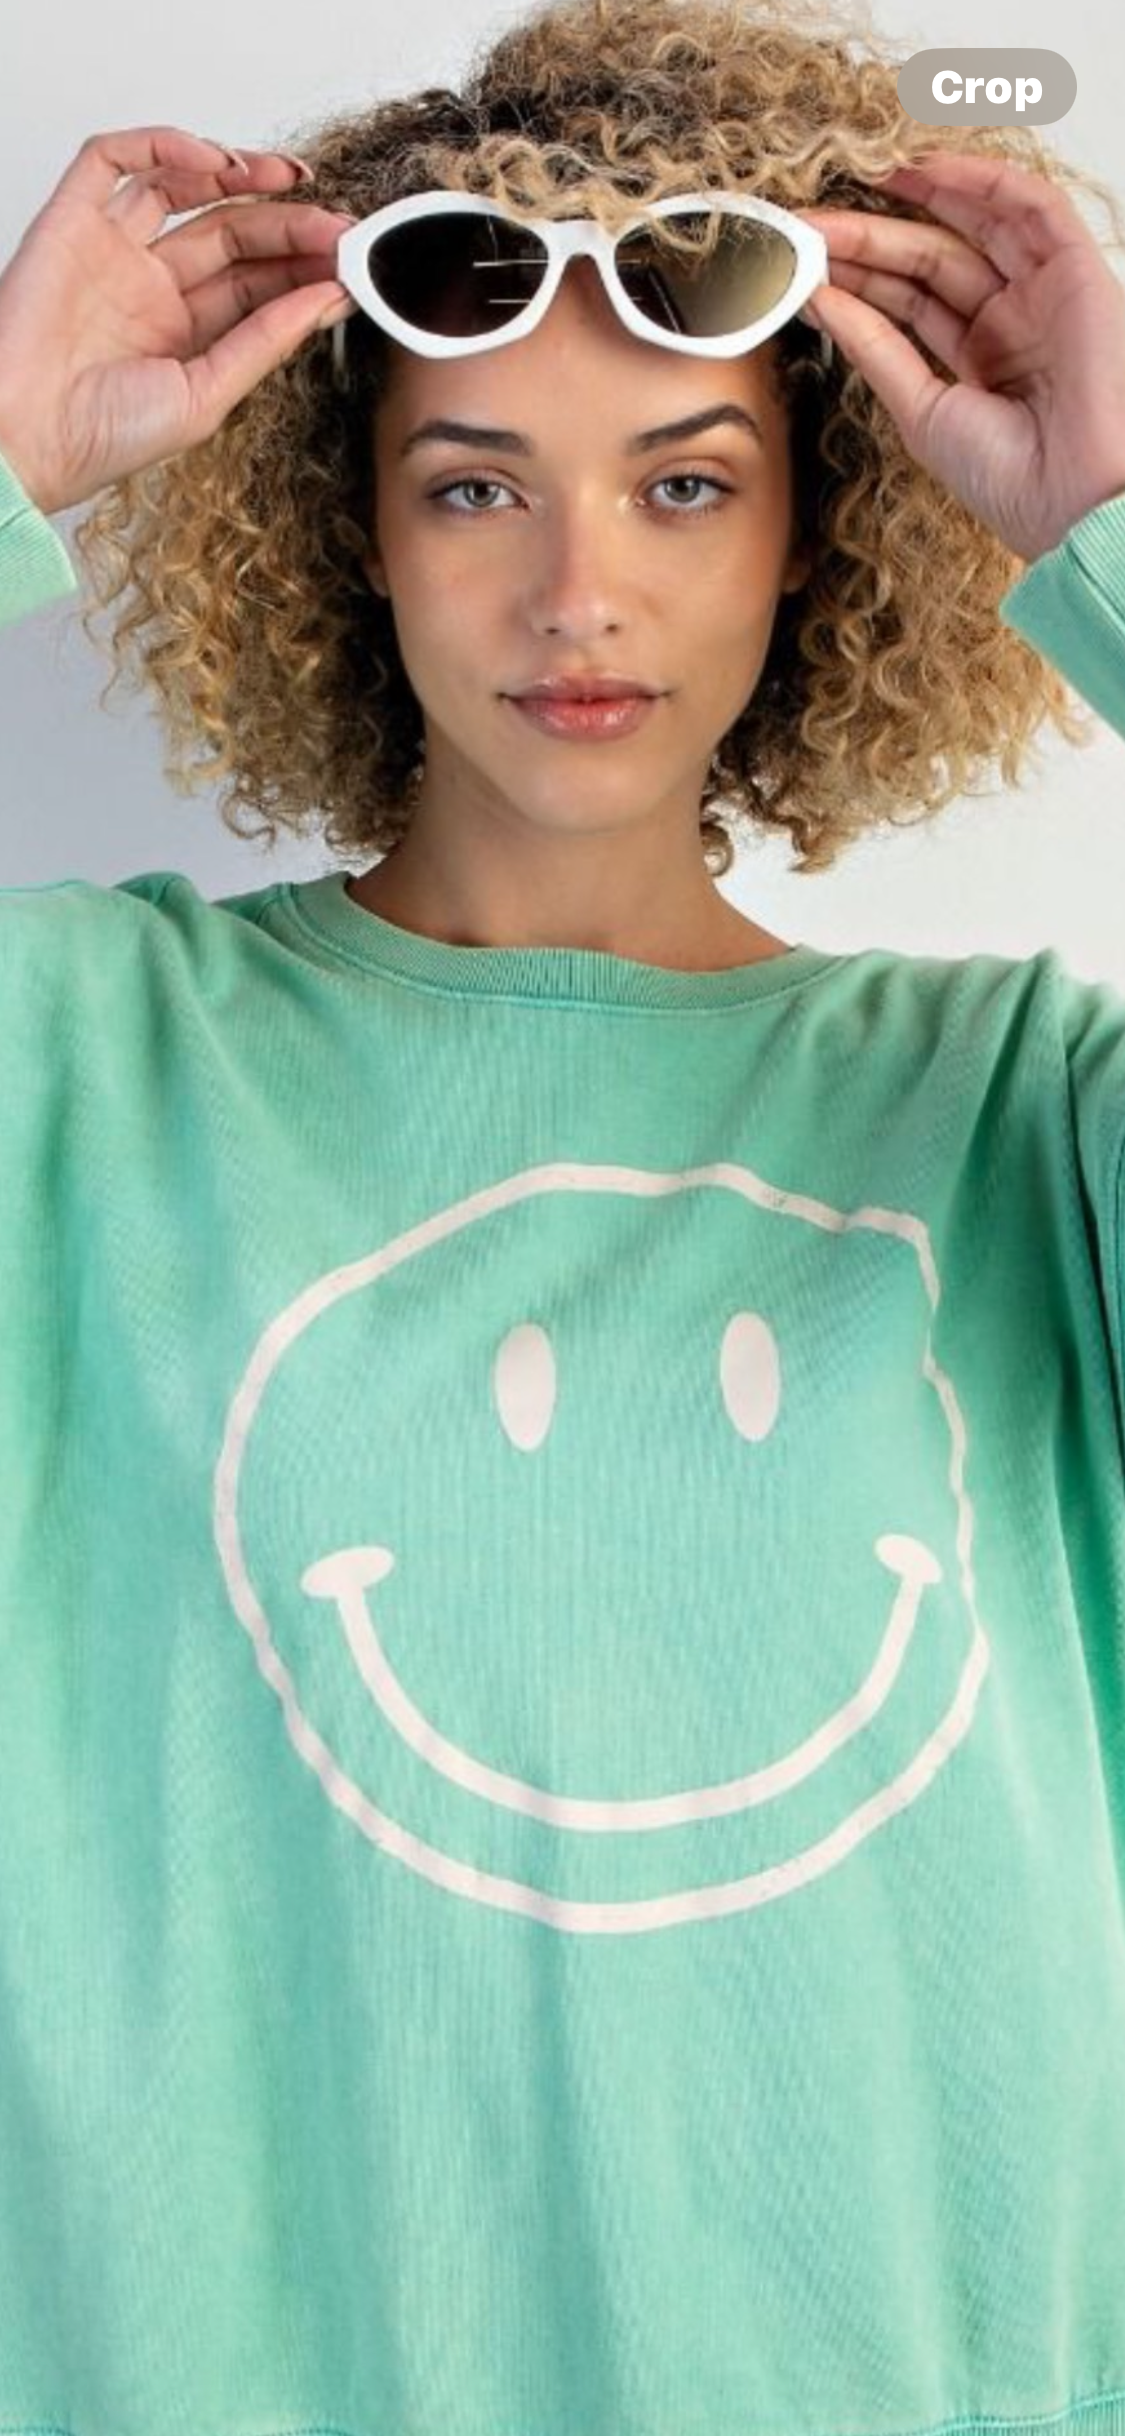 Smiley Face Sweatshirt by Easel